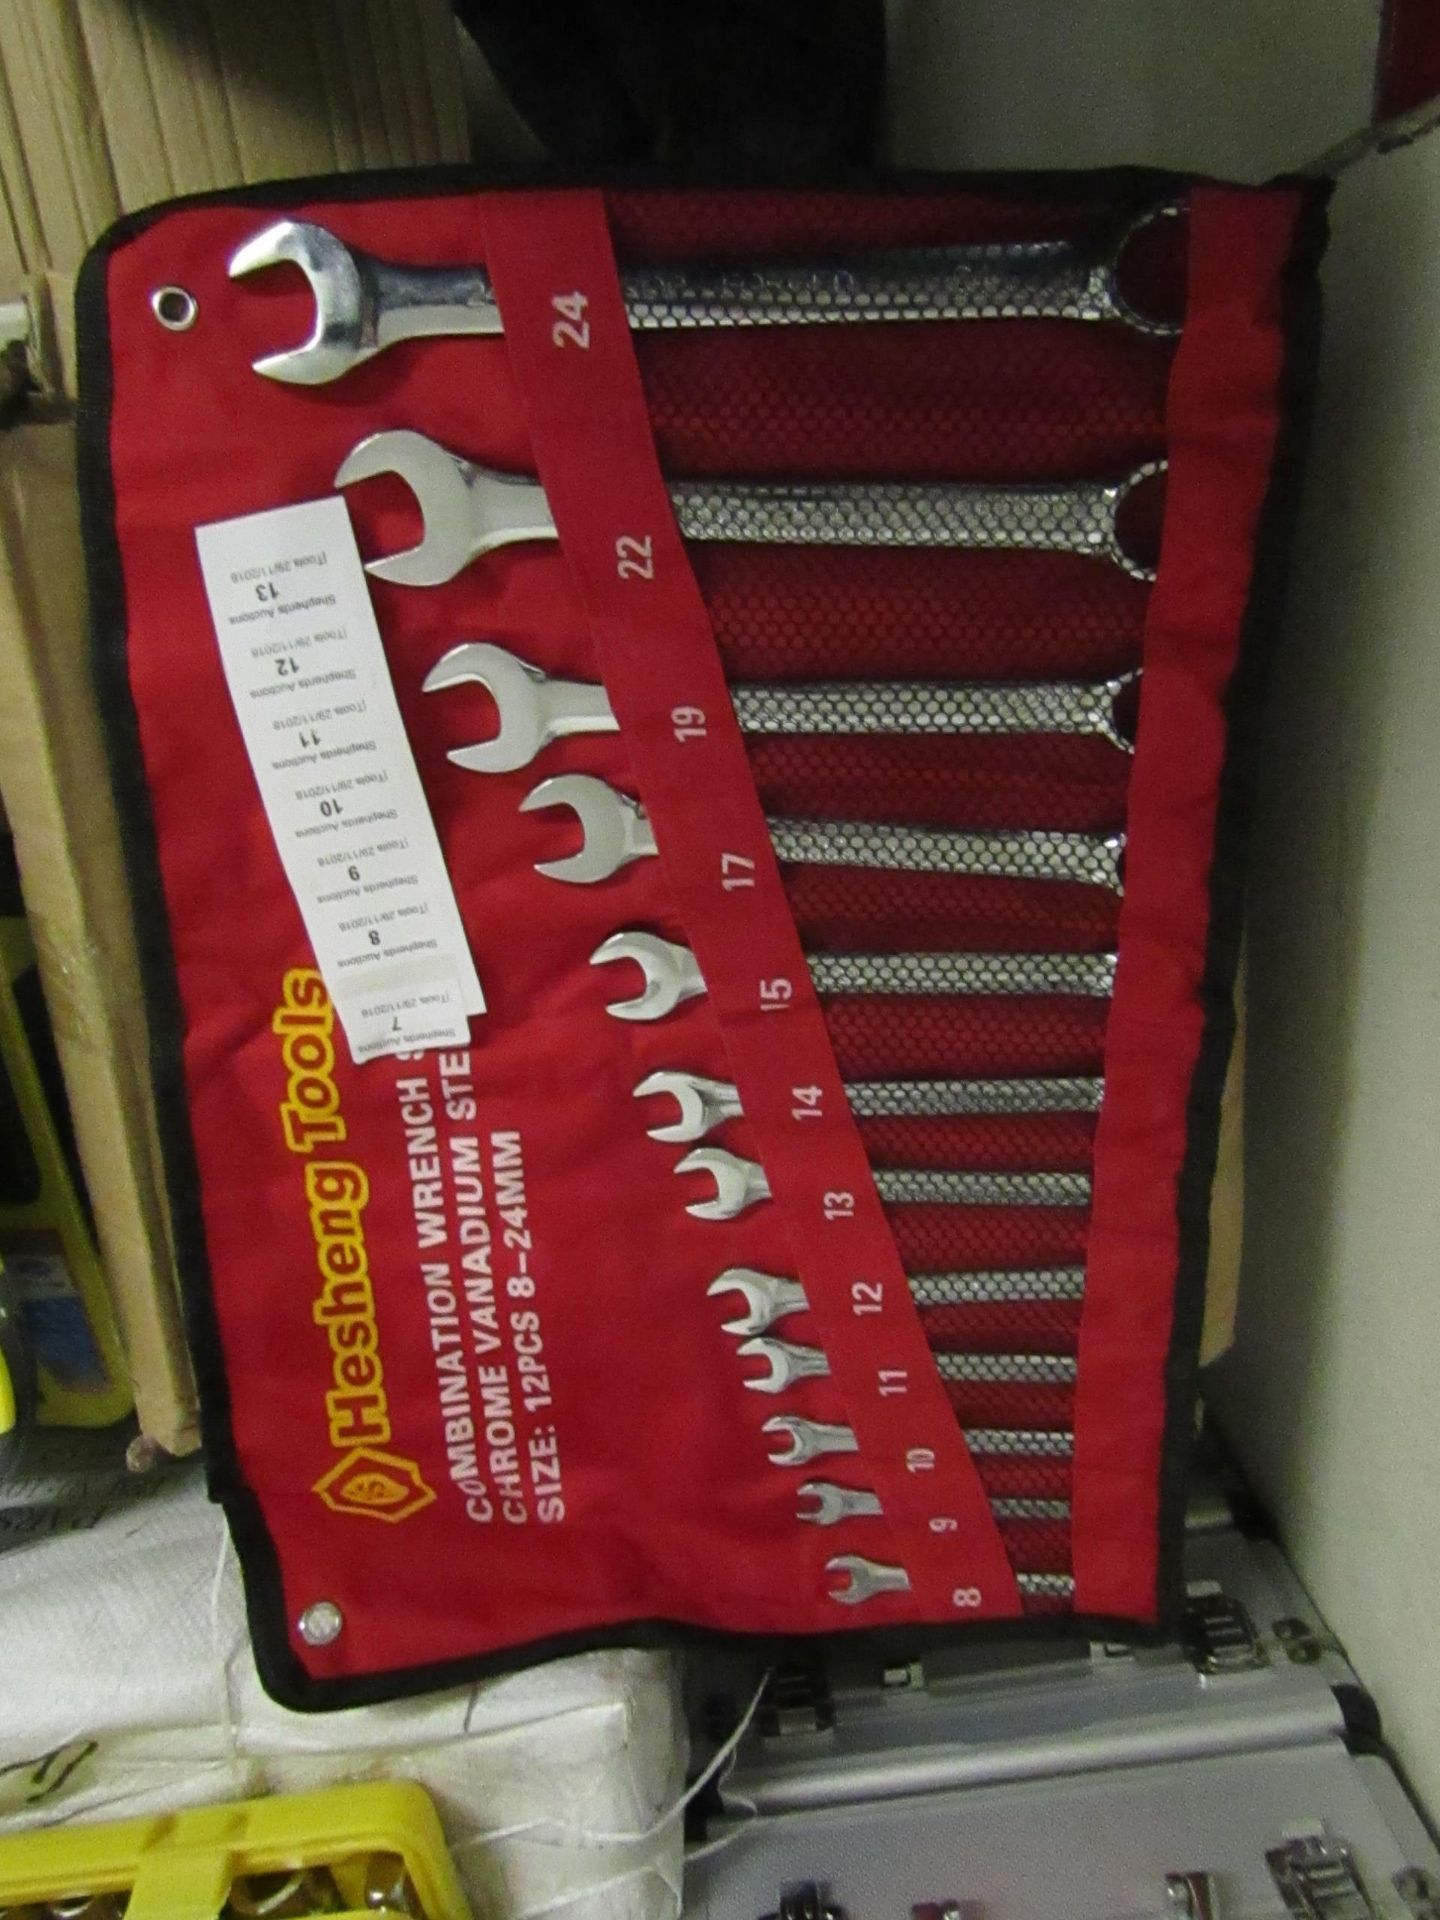 Hesheng tools set of 12 combination spaners, new in carry roll